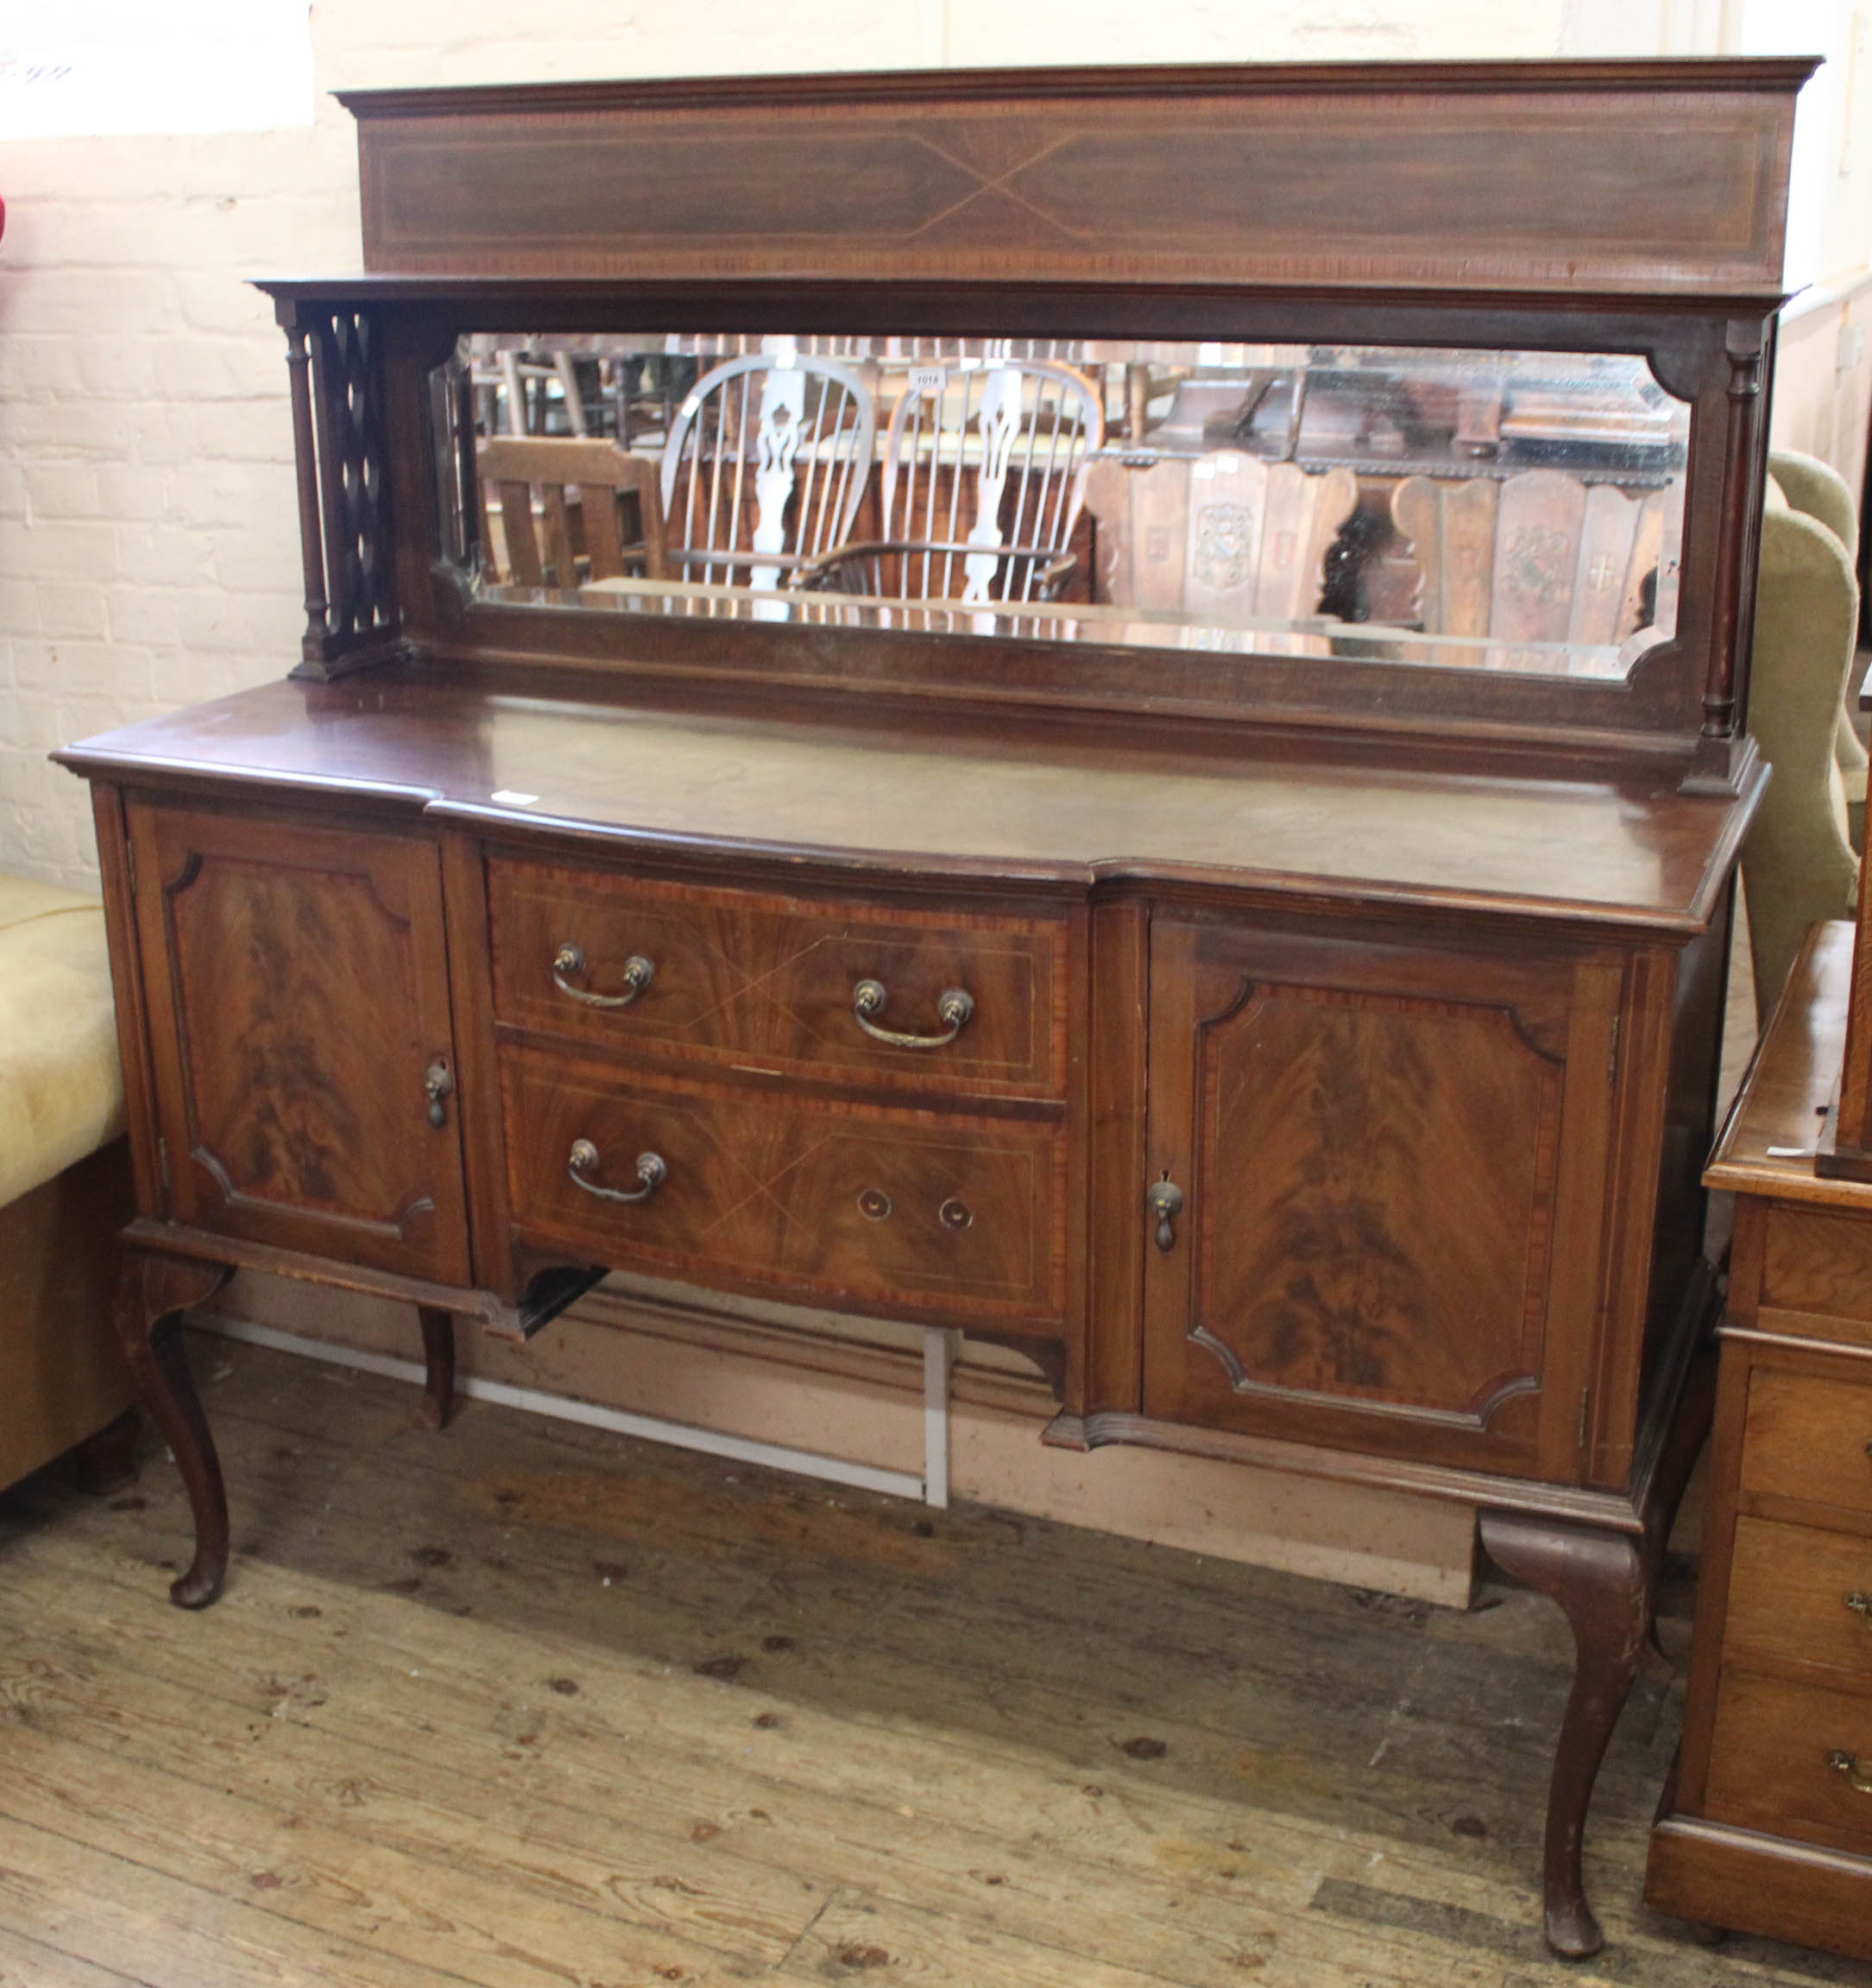 An Edwardian inlaid mahogany mirrored sideboard with two drawers and two doors